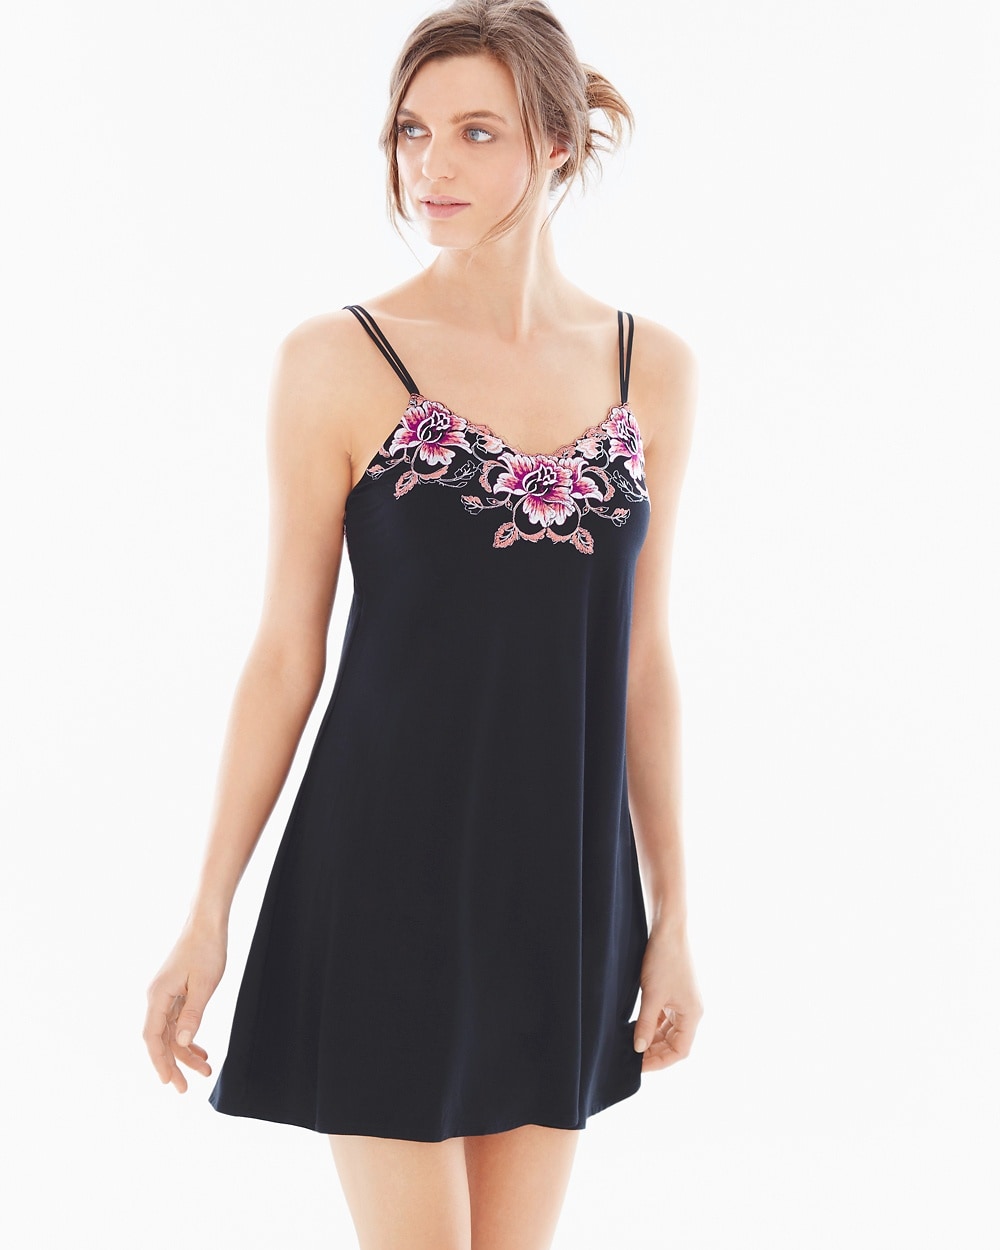 Limited Edition Sensuous Lace Floral A-Line Sleep Chemise Black/Orchid Bloom